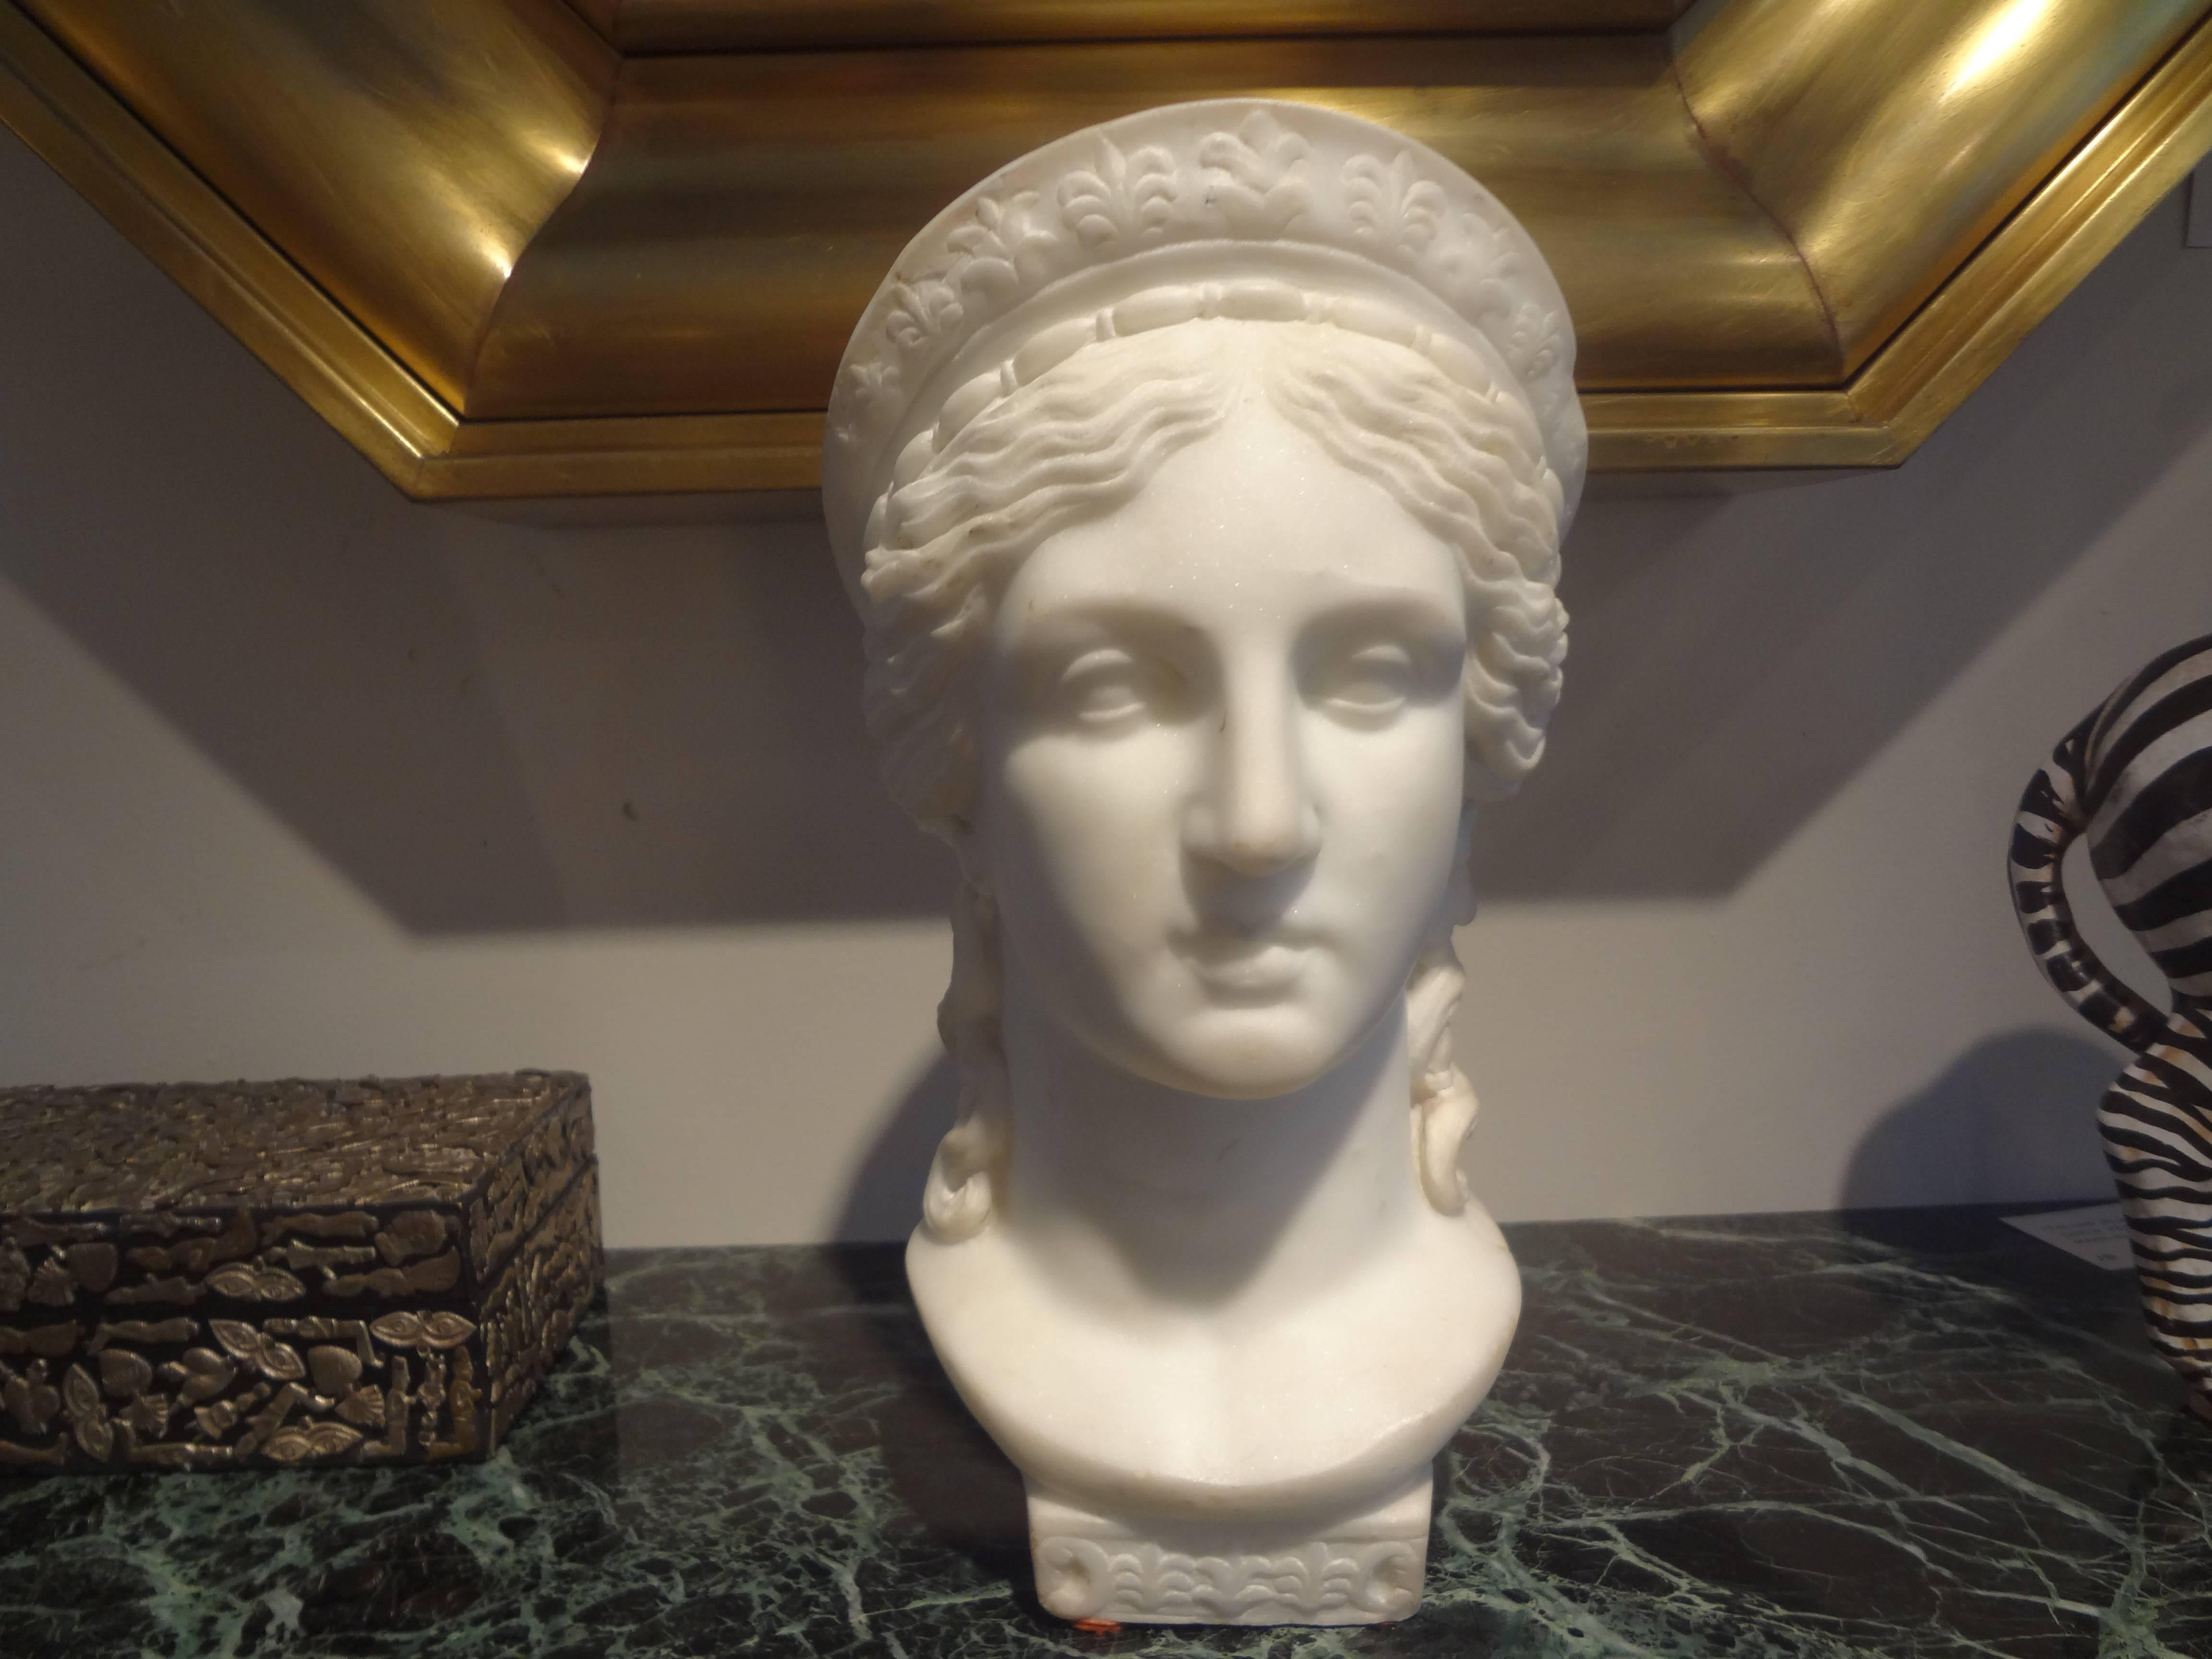 Finely carved 19th century Italian classical marble bust. This sculpture adds a touch of neoclassicism to a variety of interior styles. This bust was possibly a Grand Tour item.